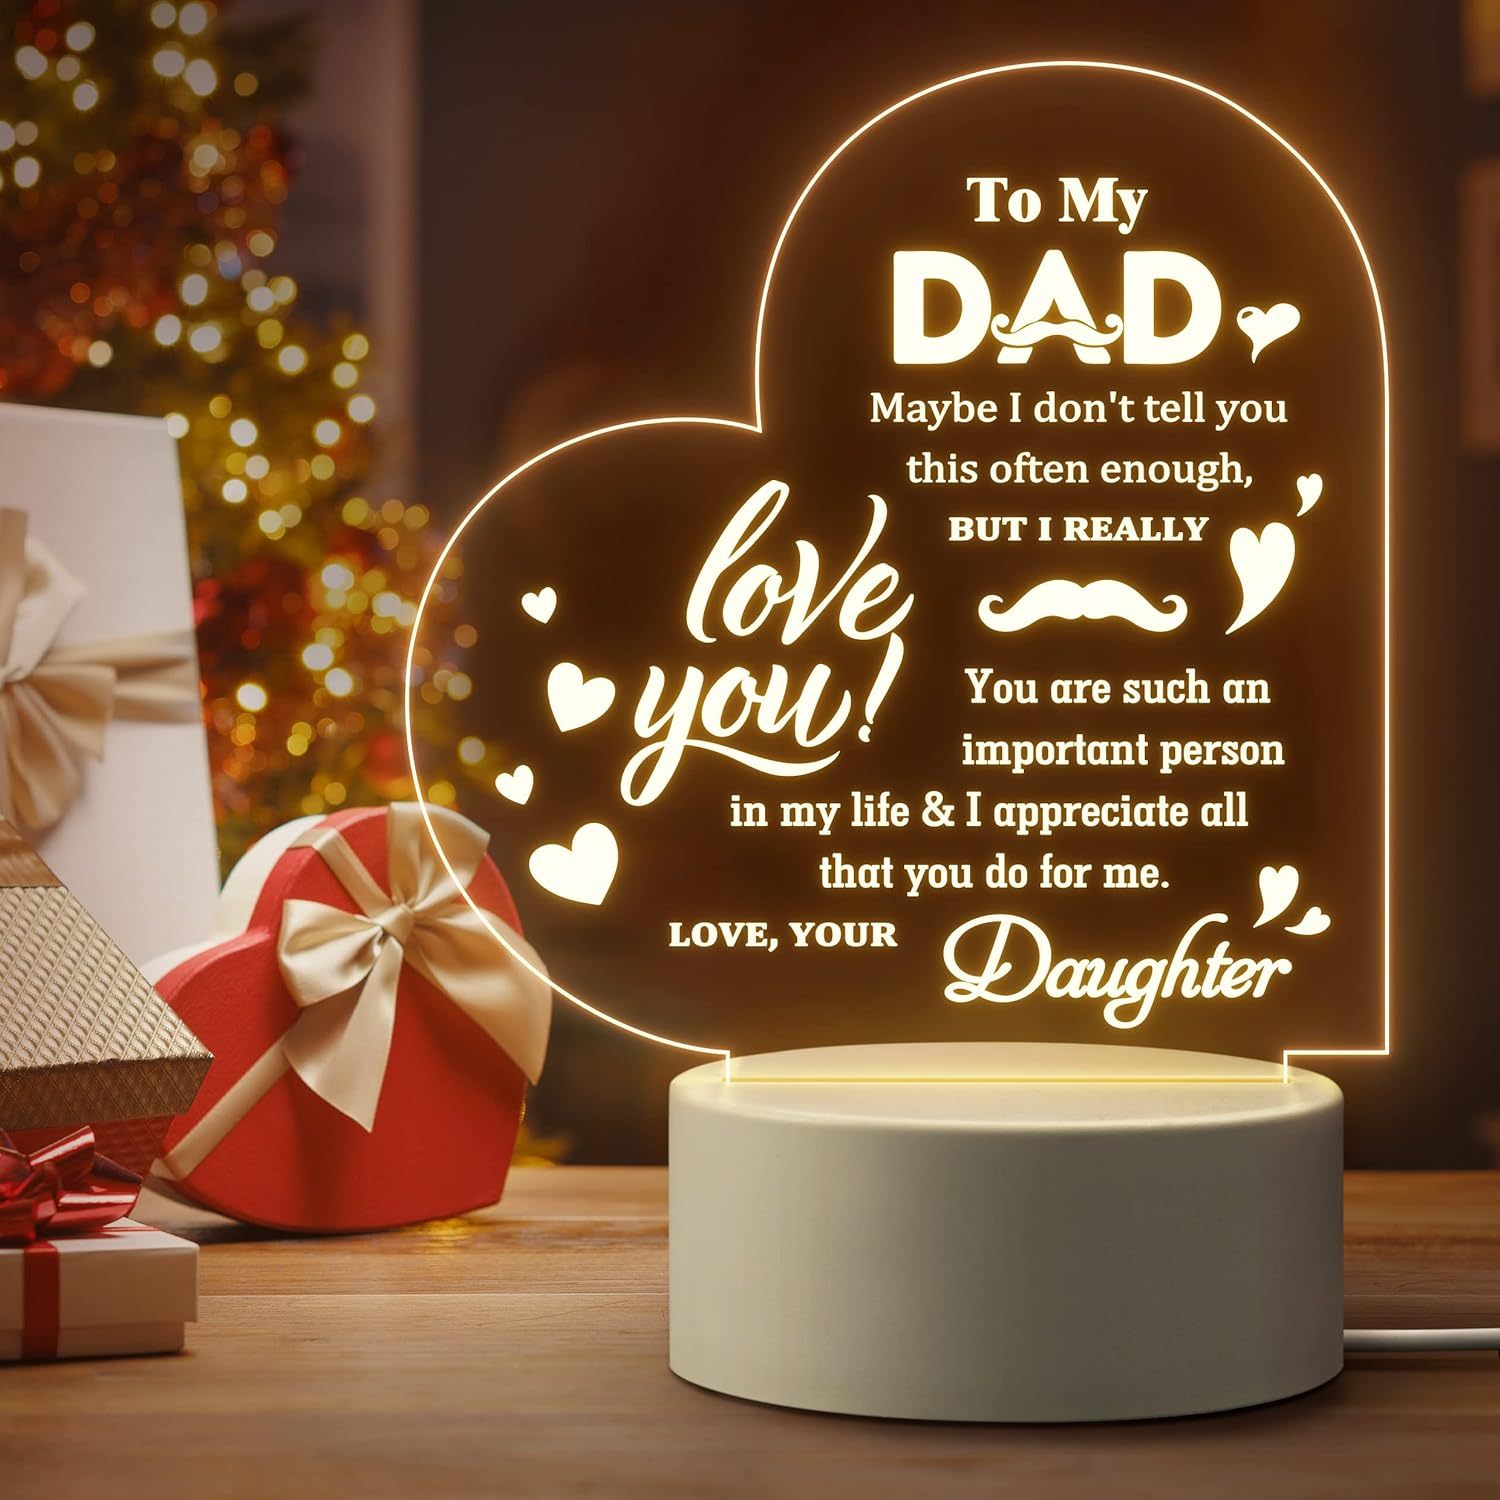 

1pc, Gifts For Dad From Daughter, Best Christmas Gifts For Dad, To My Dad Gifts Night Light With Warm Words, Cool Gifts For Dad Birthday, Father's Day, Retirement Or Christmas